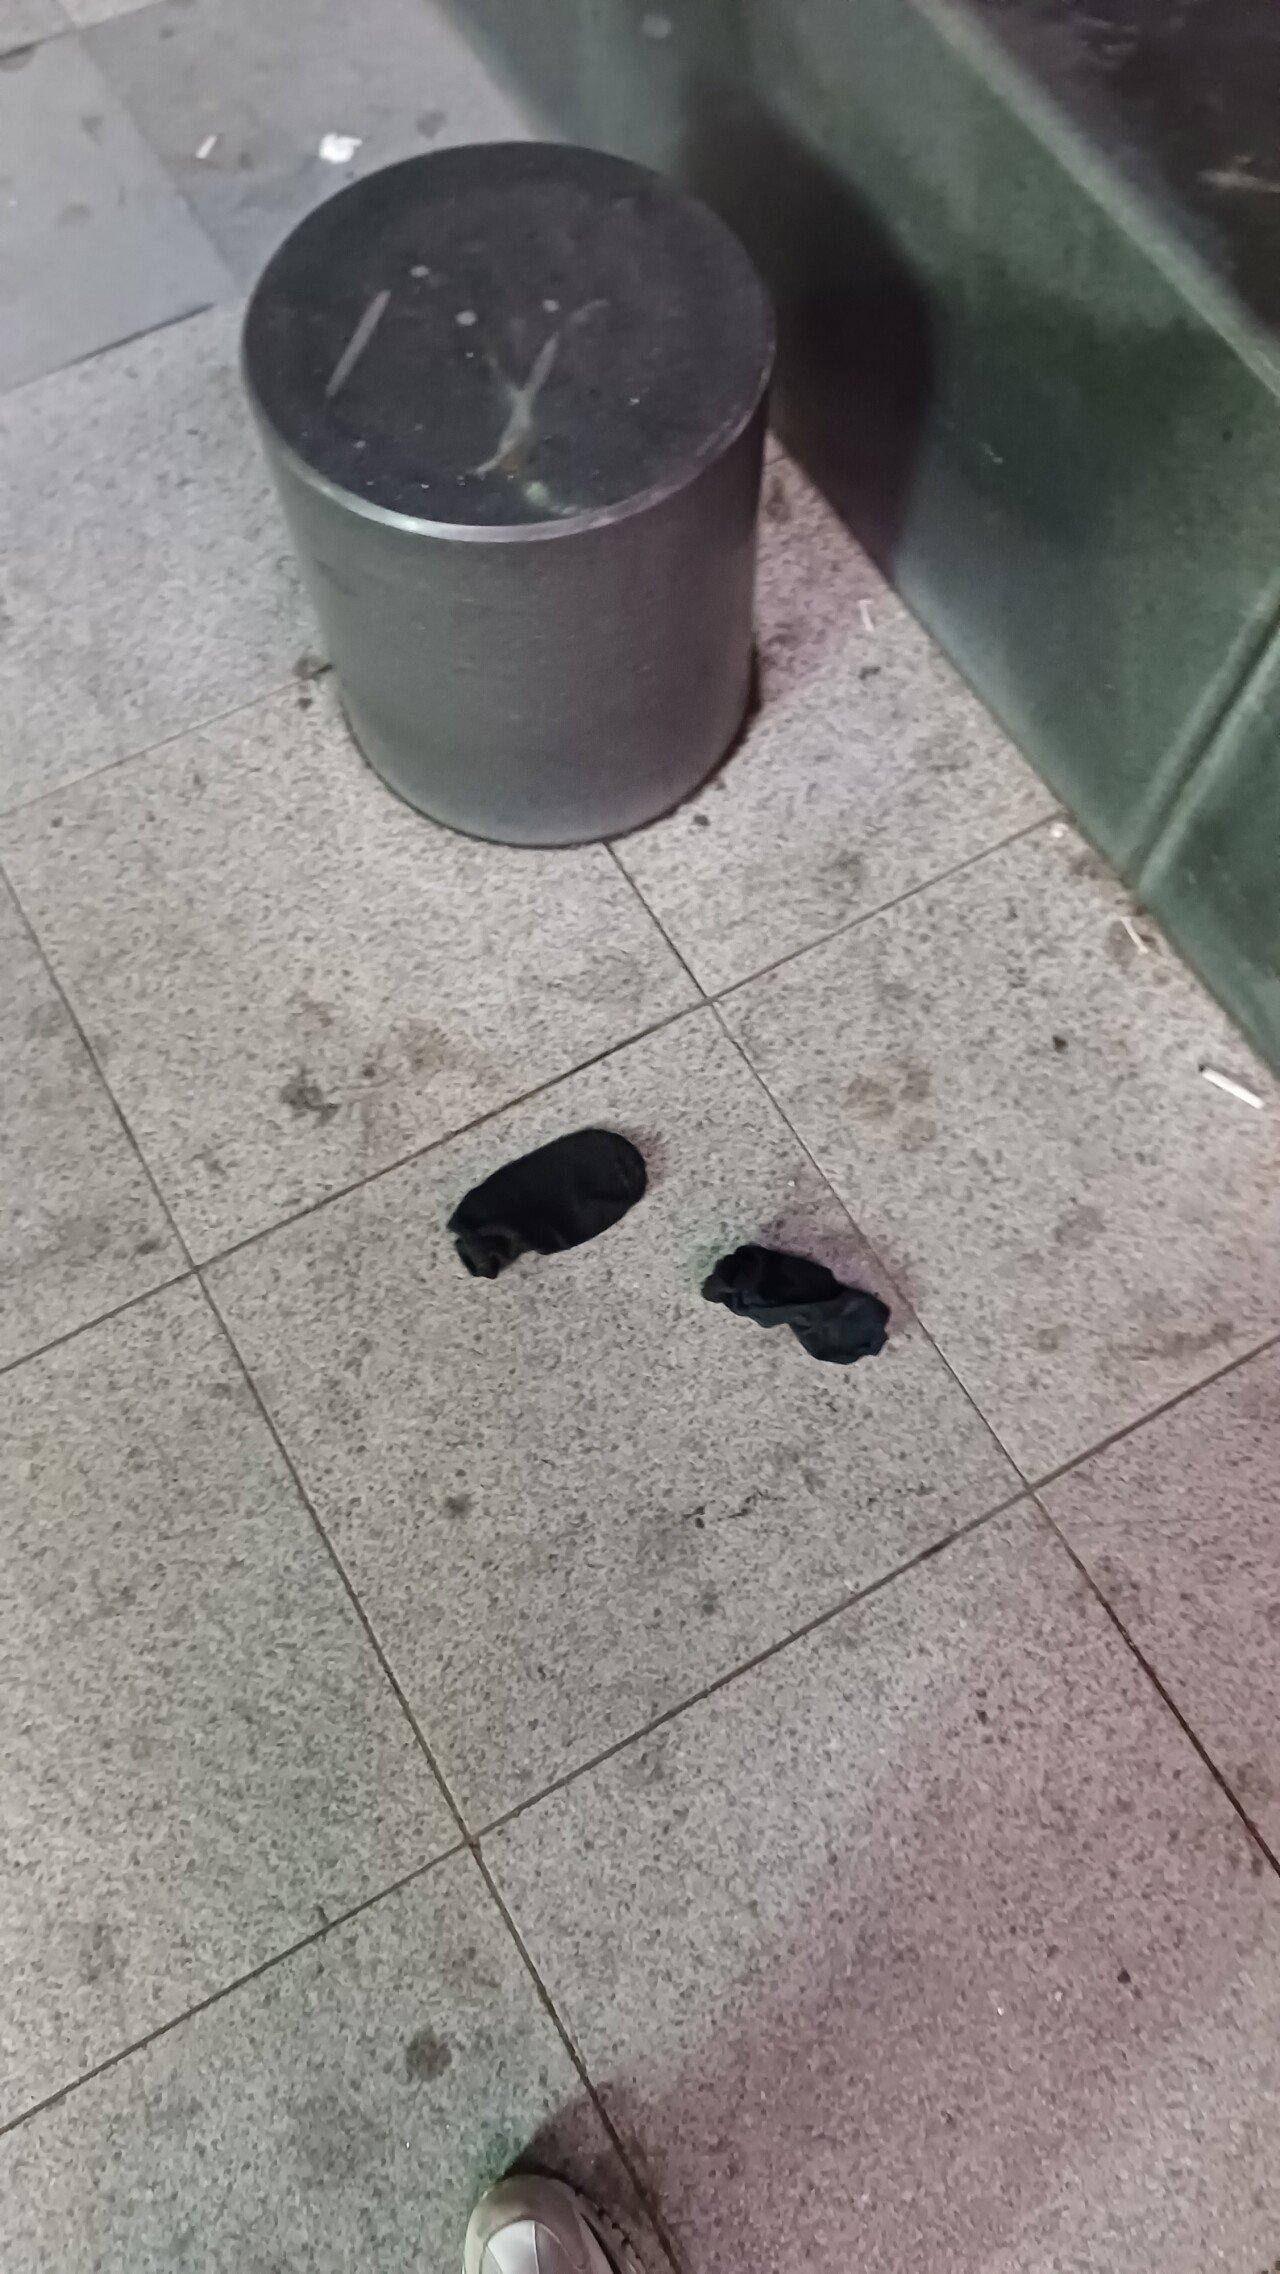 I went to a bell event and someone threw away their socks